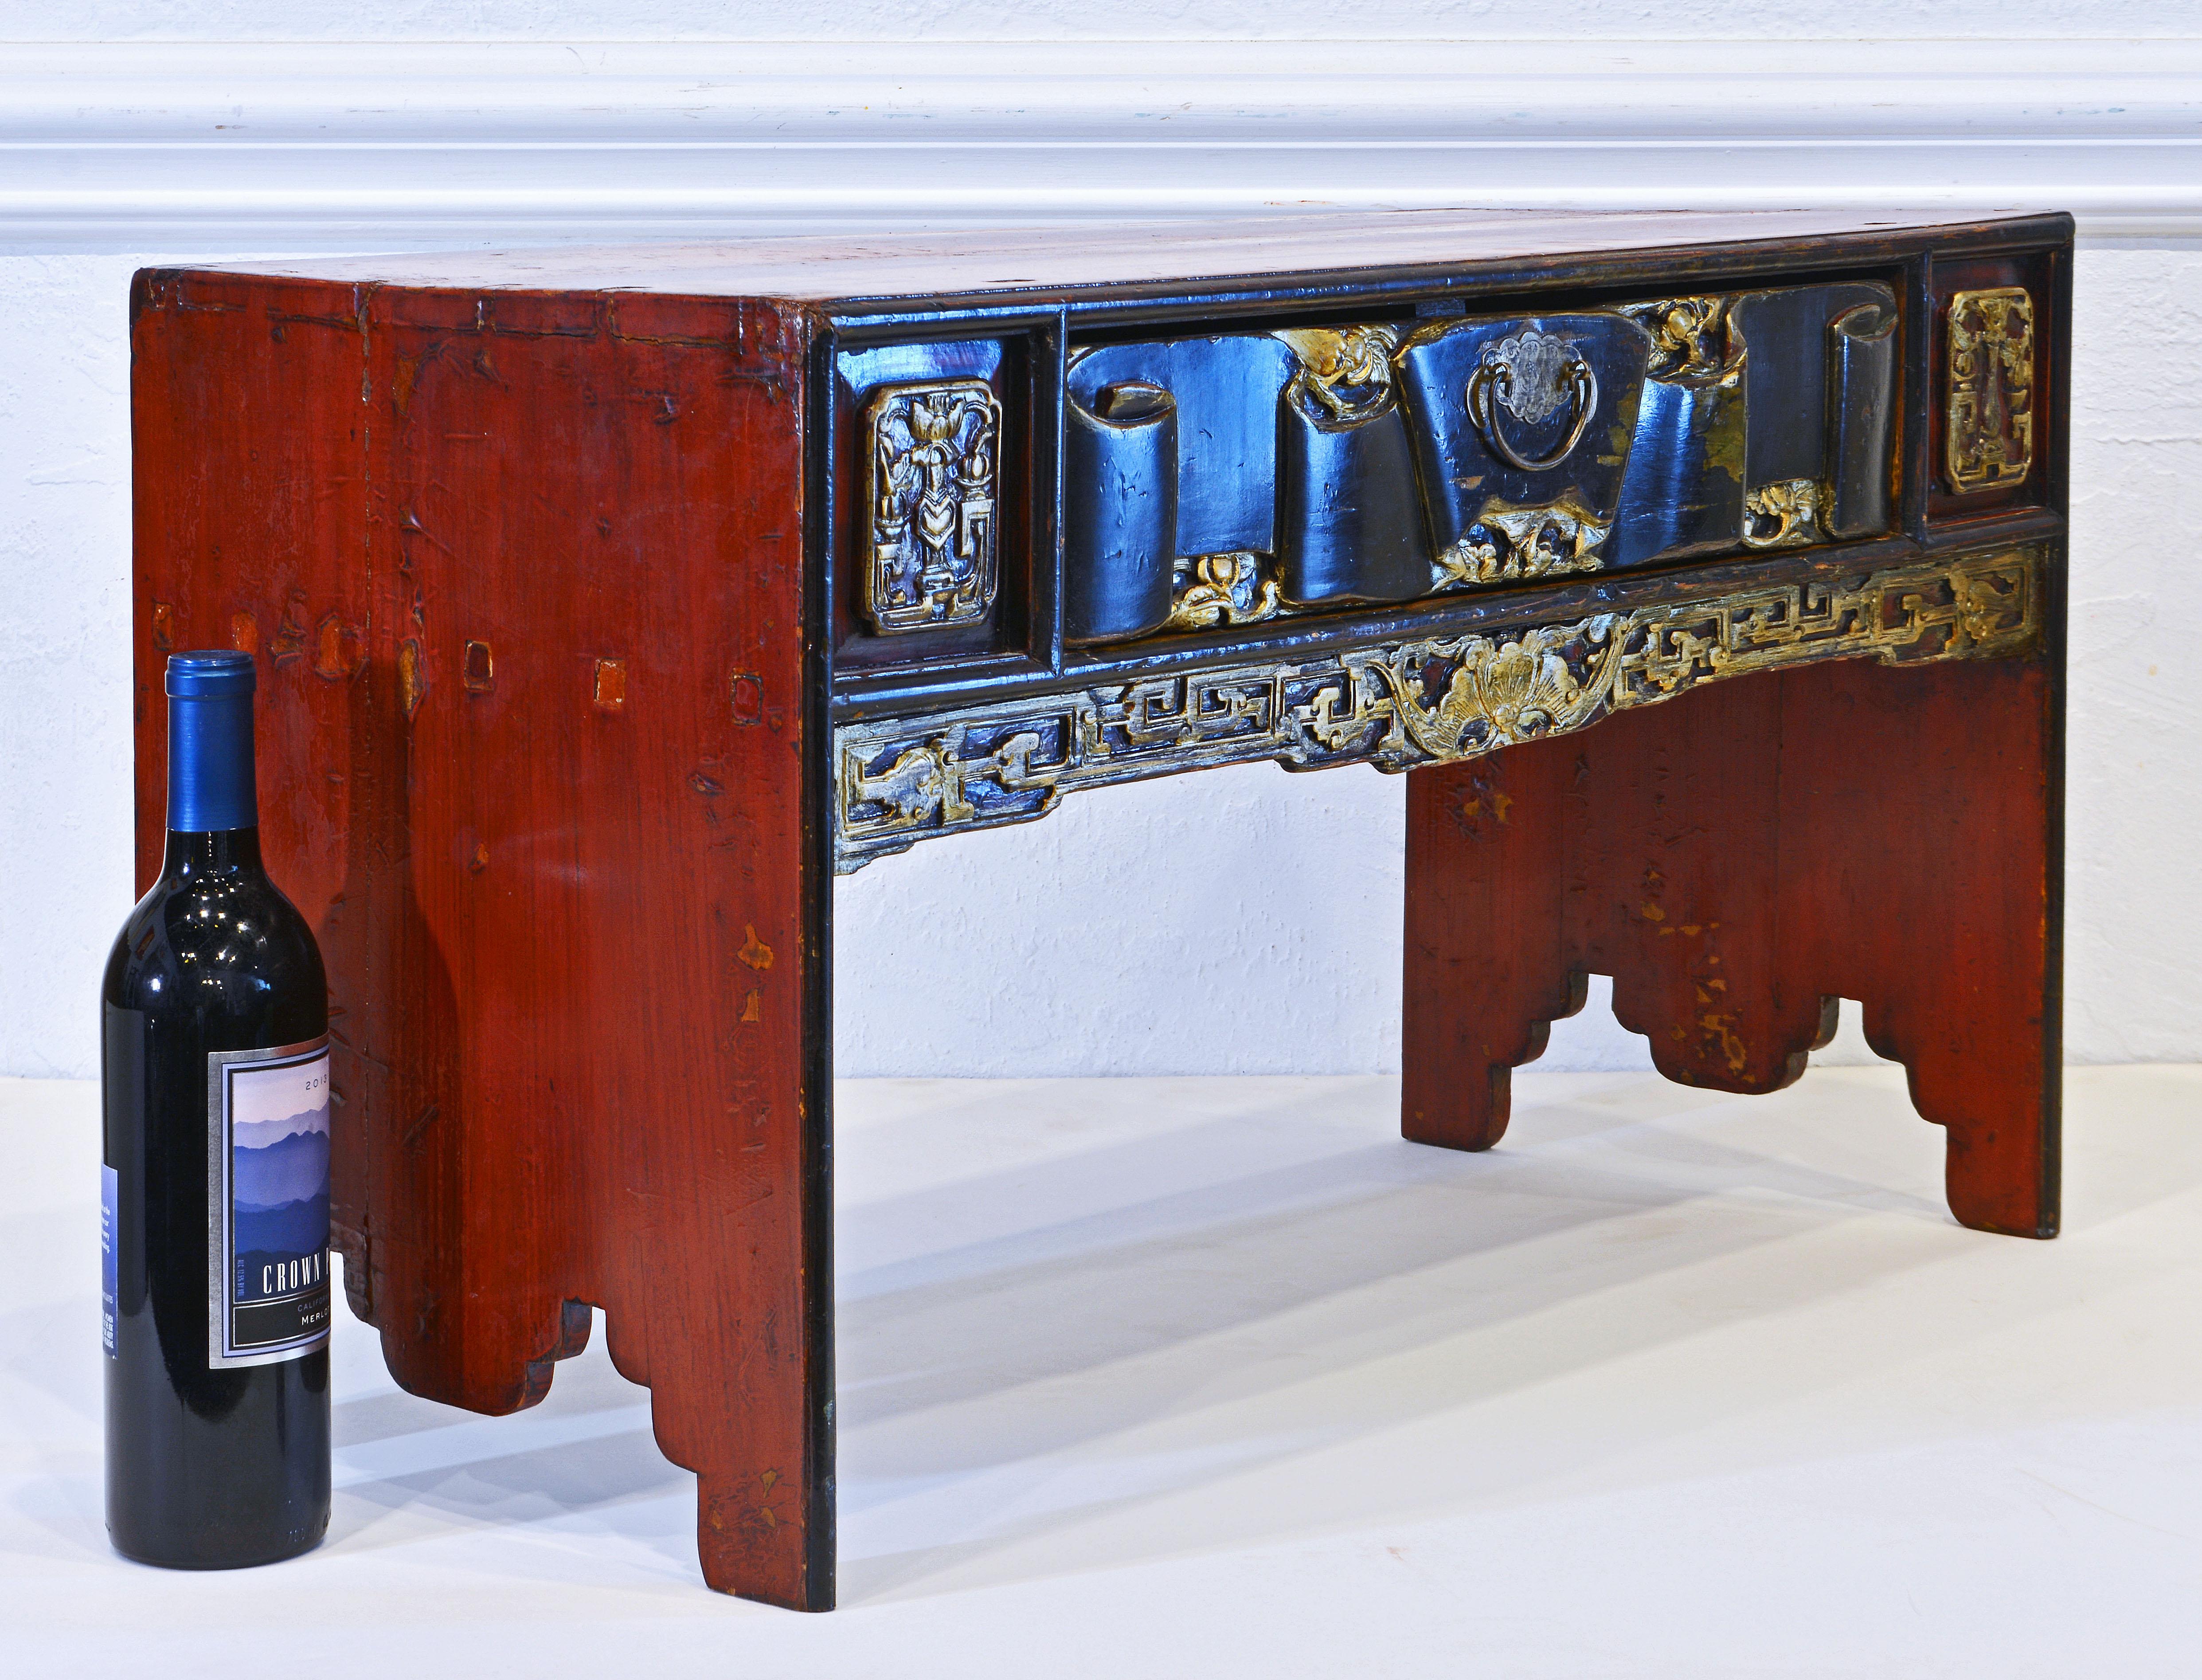 This petite Chinese intricately carved lacquer and gilt altar or praying table dates back to the 19th century. It features a combination of reddish transparent accented by black lacquer and gilt decoration. The exceptional drawer front is carved